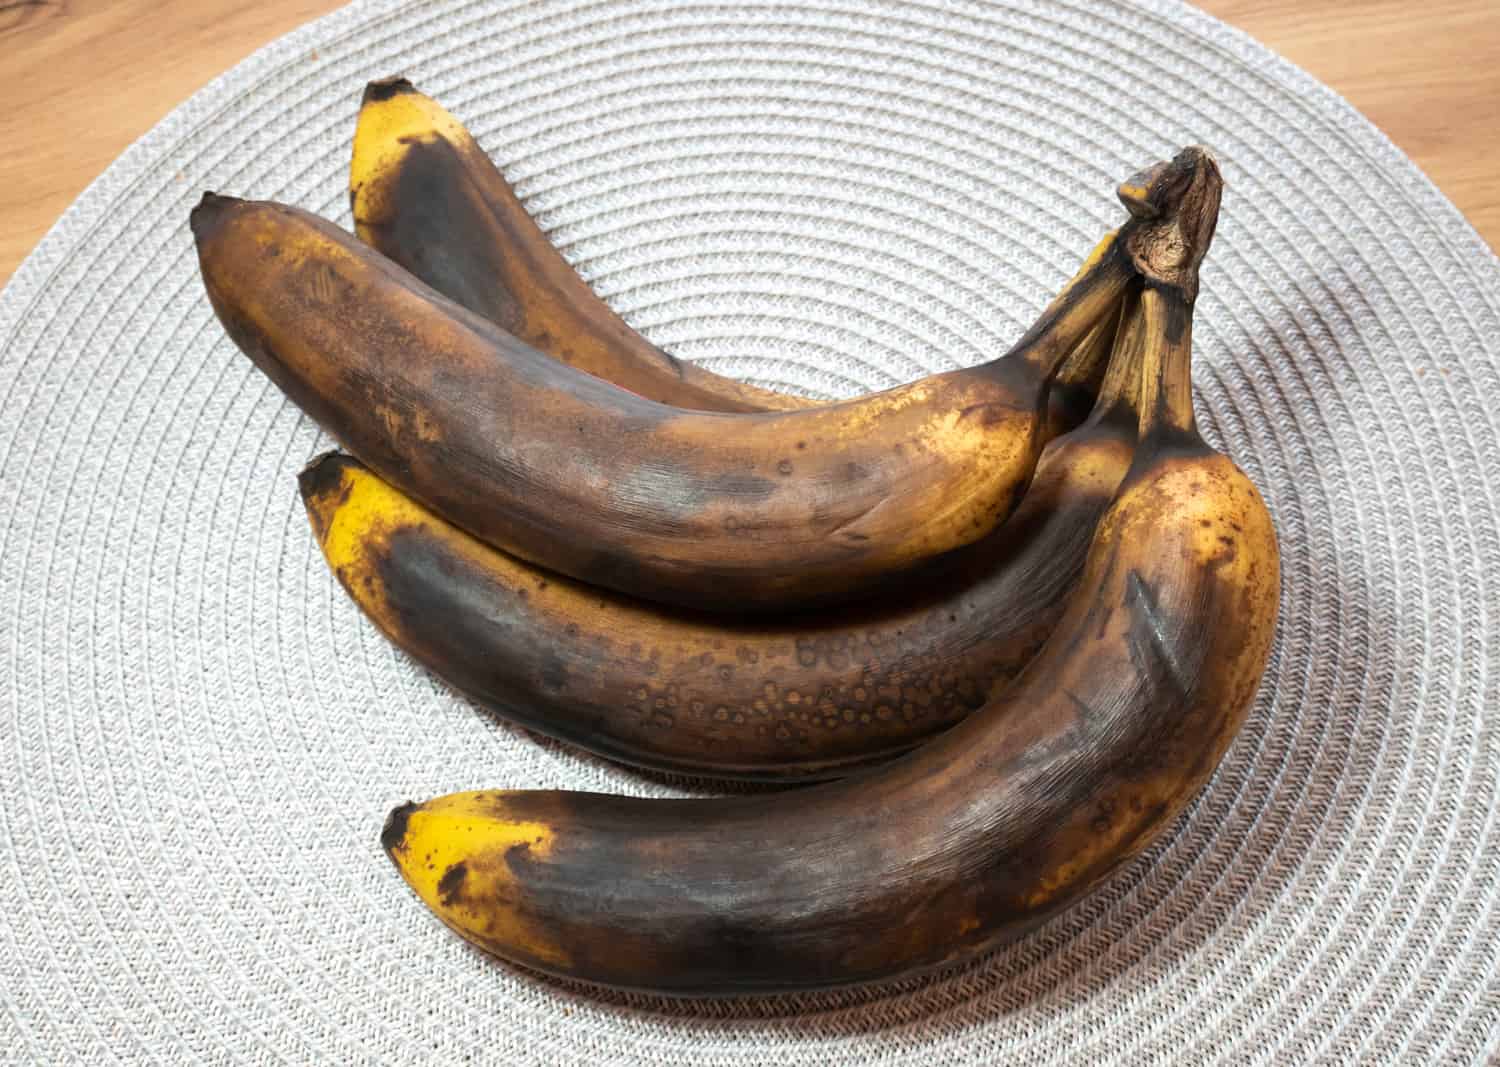 Dark and Spoiled banana on the table. Rotten fruit.